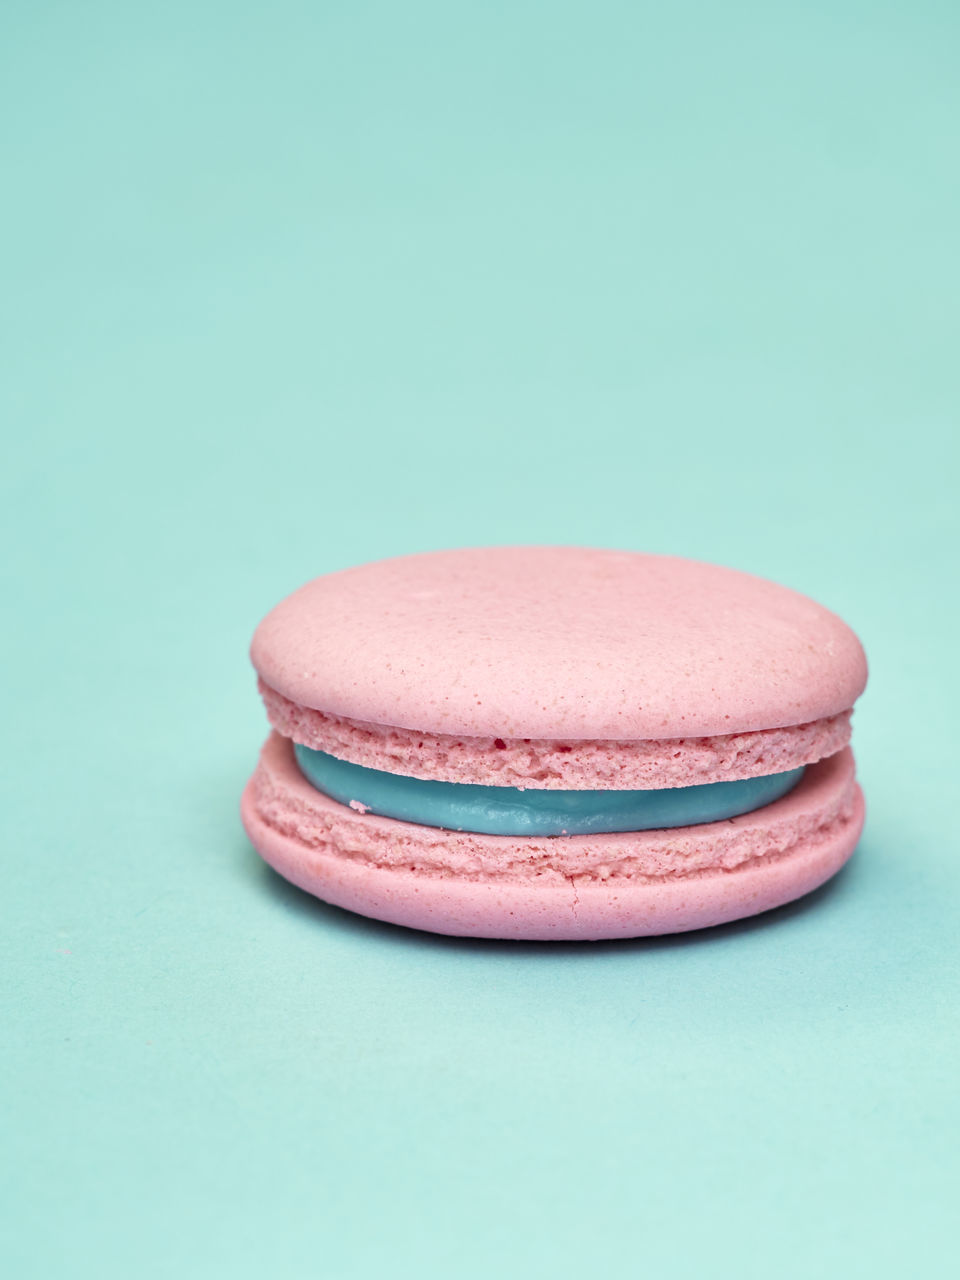 CLOSE-UP OF PINK CAKE AGAINST BLUE BACKGROUND